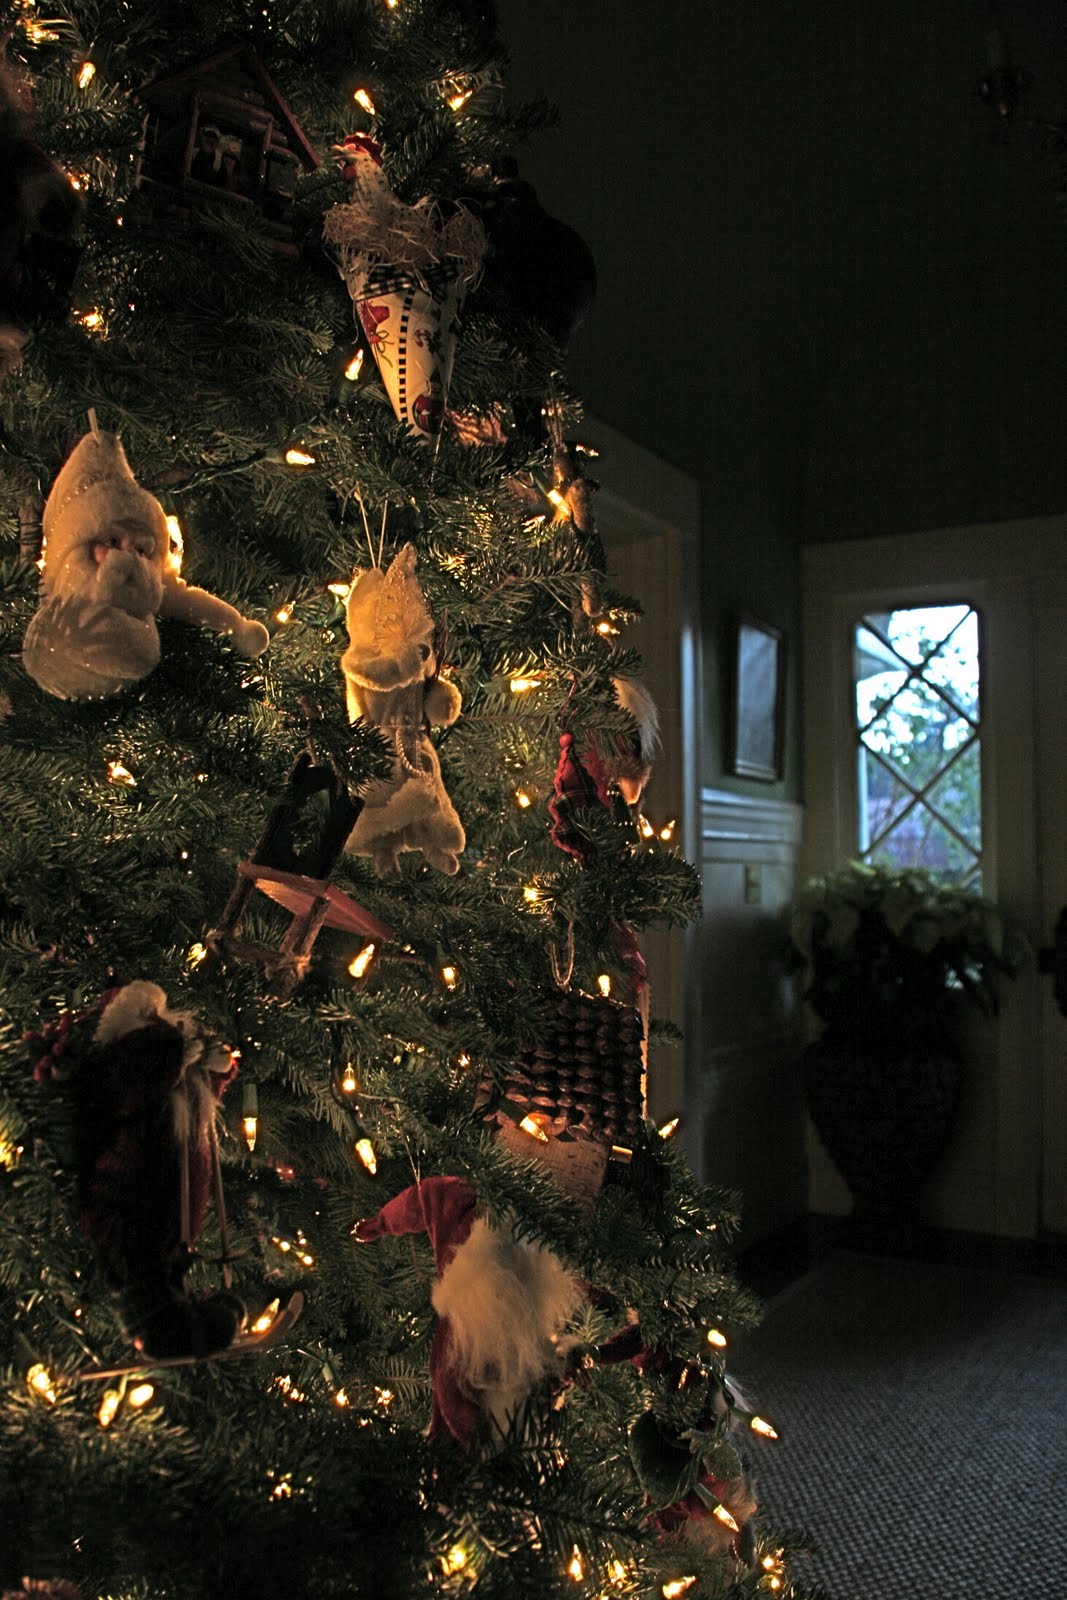 vignette design: O Christmas Tree, How Lovely Are Your Branches